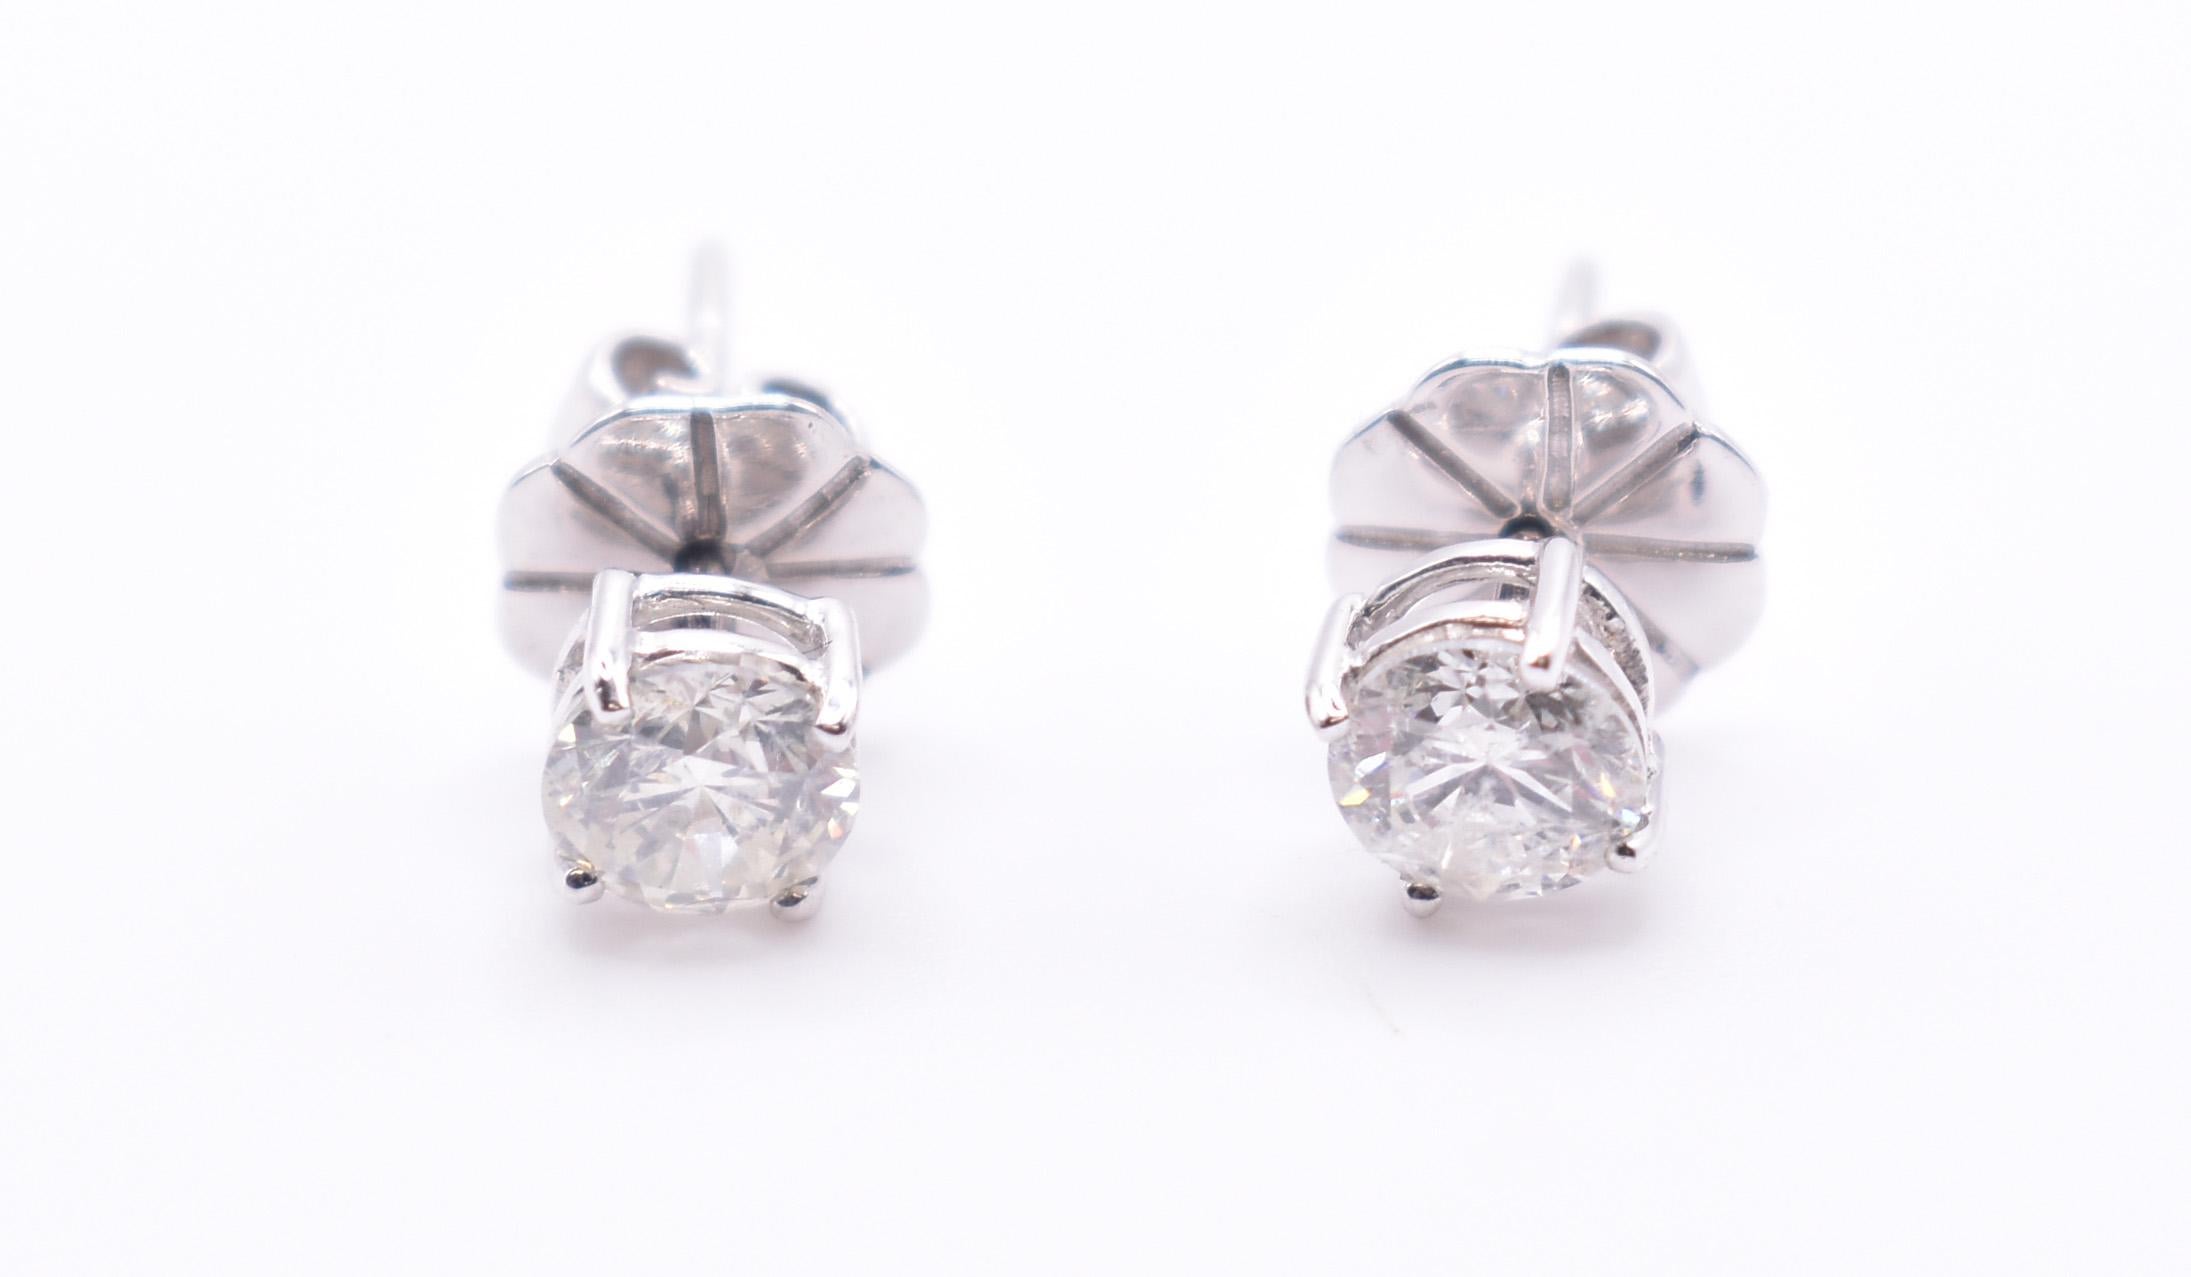 For sale is a lovely pair of 18k white gold 1.23ct diamond stud earrings.

Metal: 18K White Gold
Total Carat Weight: 1.23ct